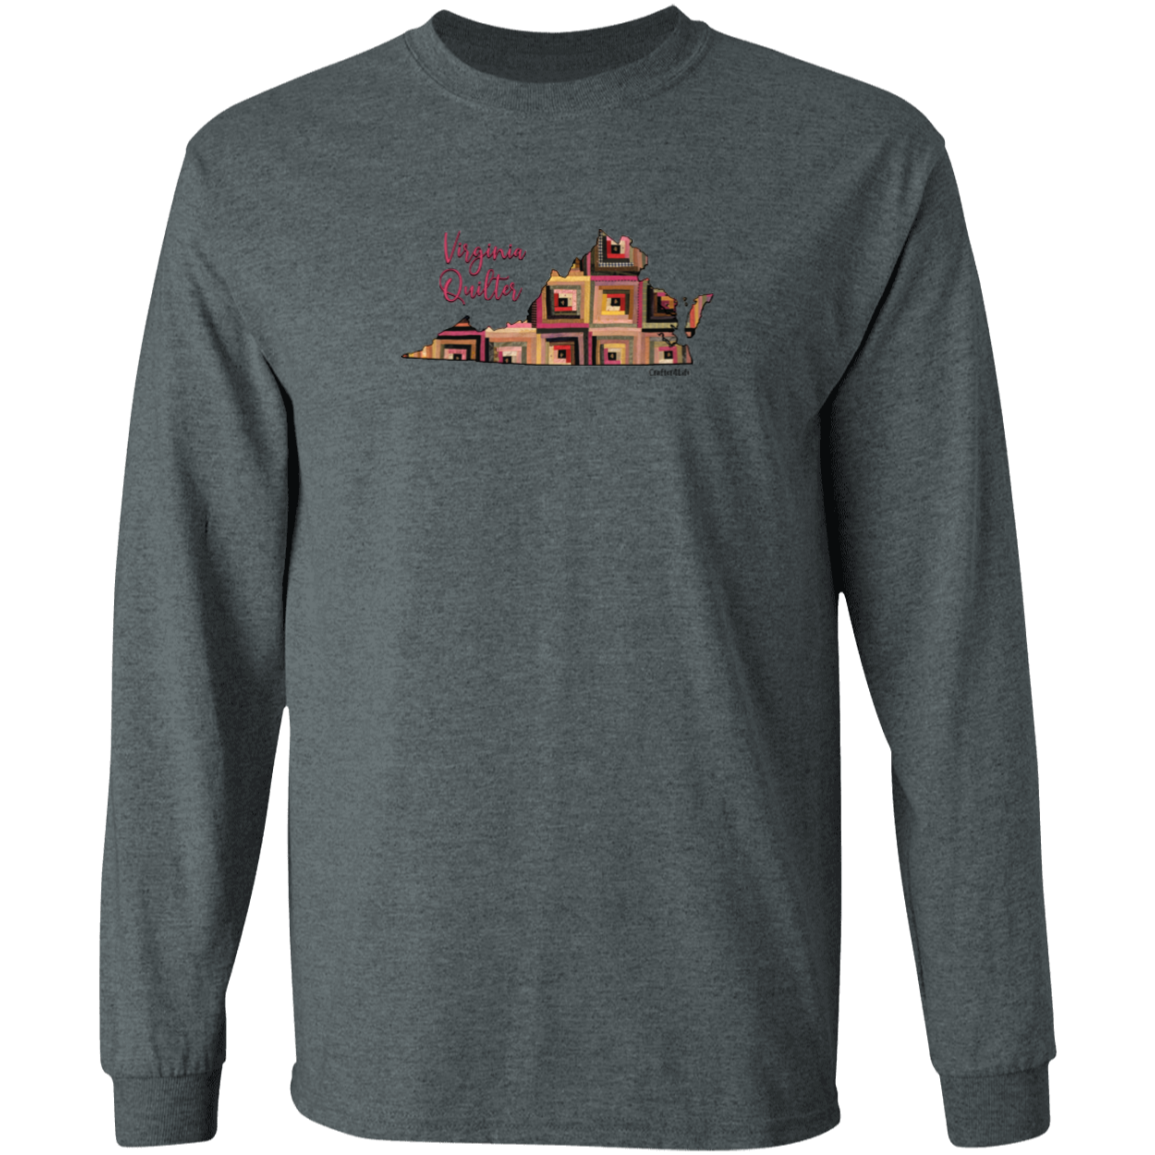 Virginia Quilter Long Sleeve T-Shirt, Gift for Quilting Friends and Family